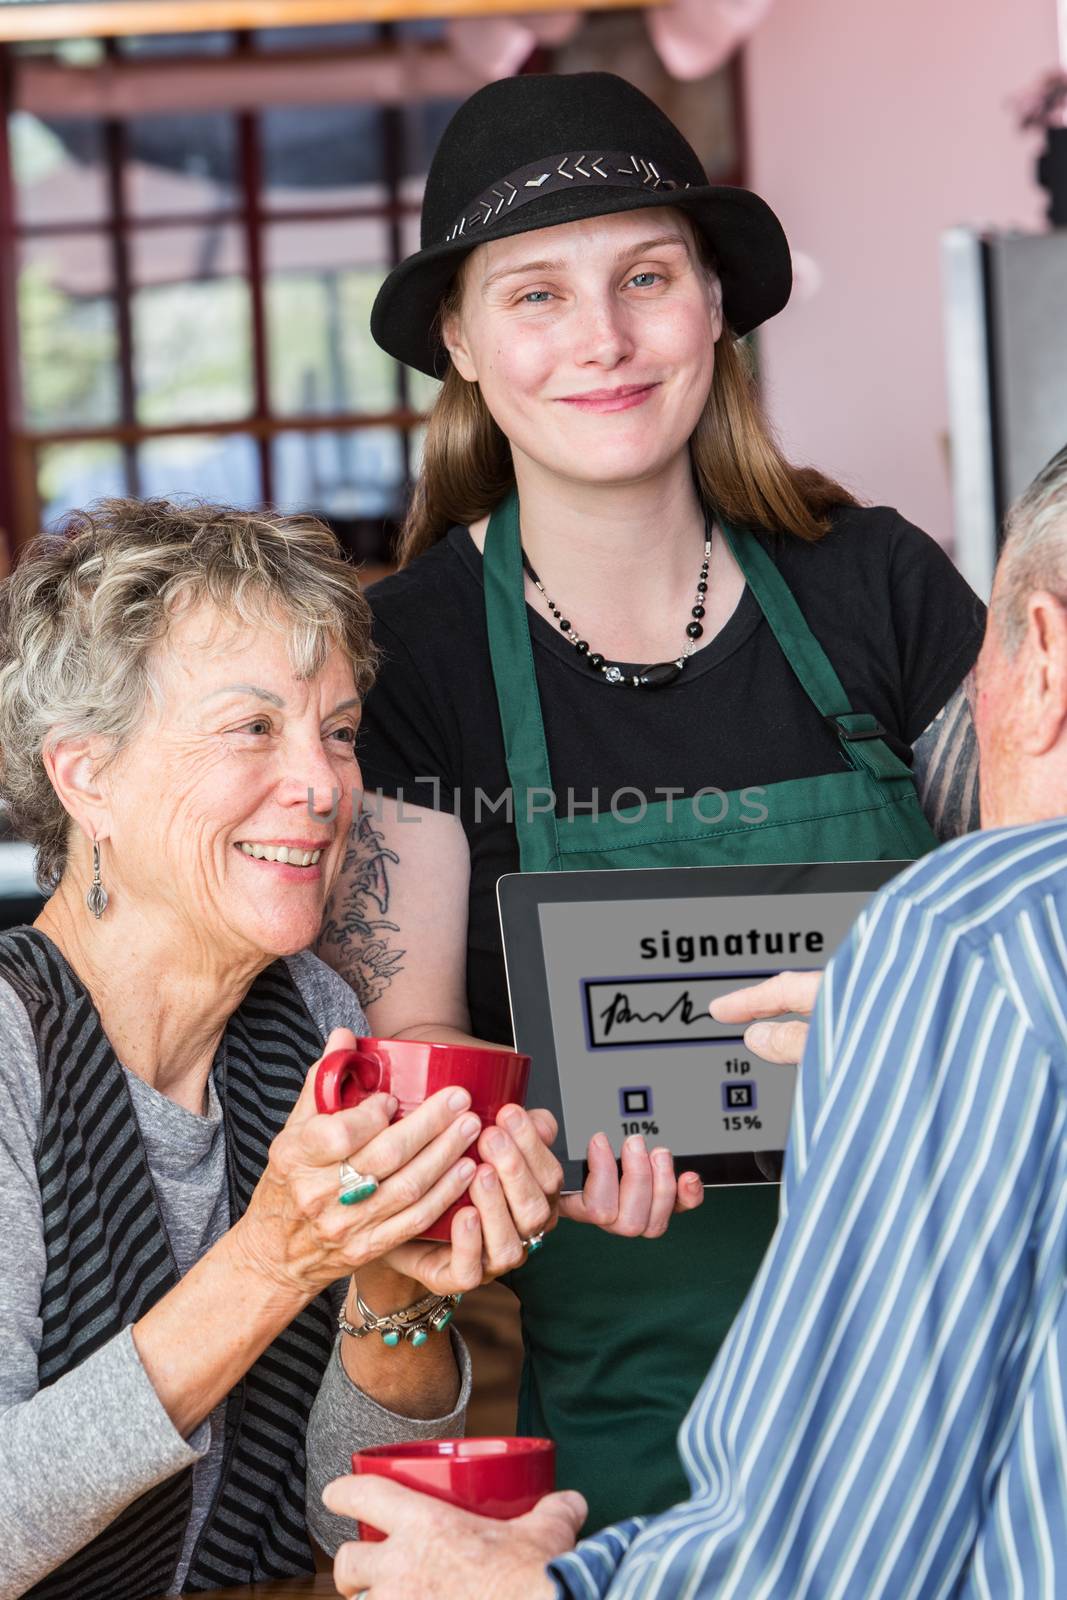 Woman watching man write signature on tablet by Creatista